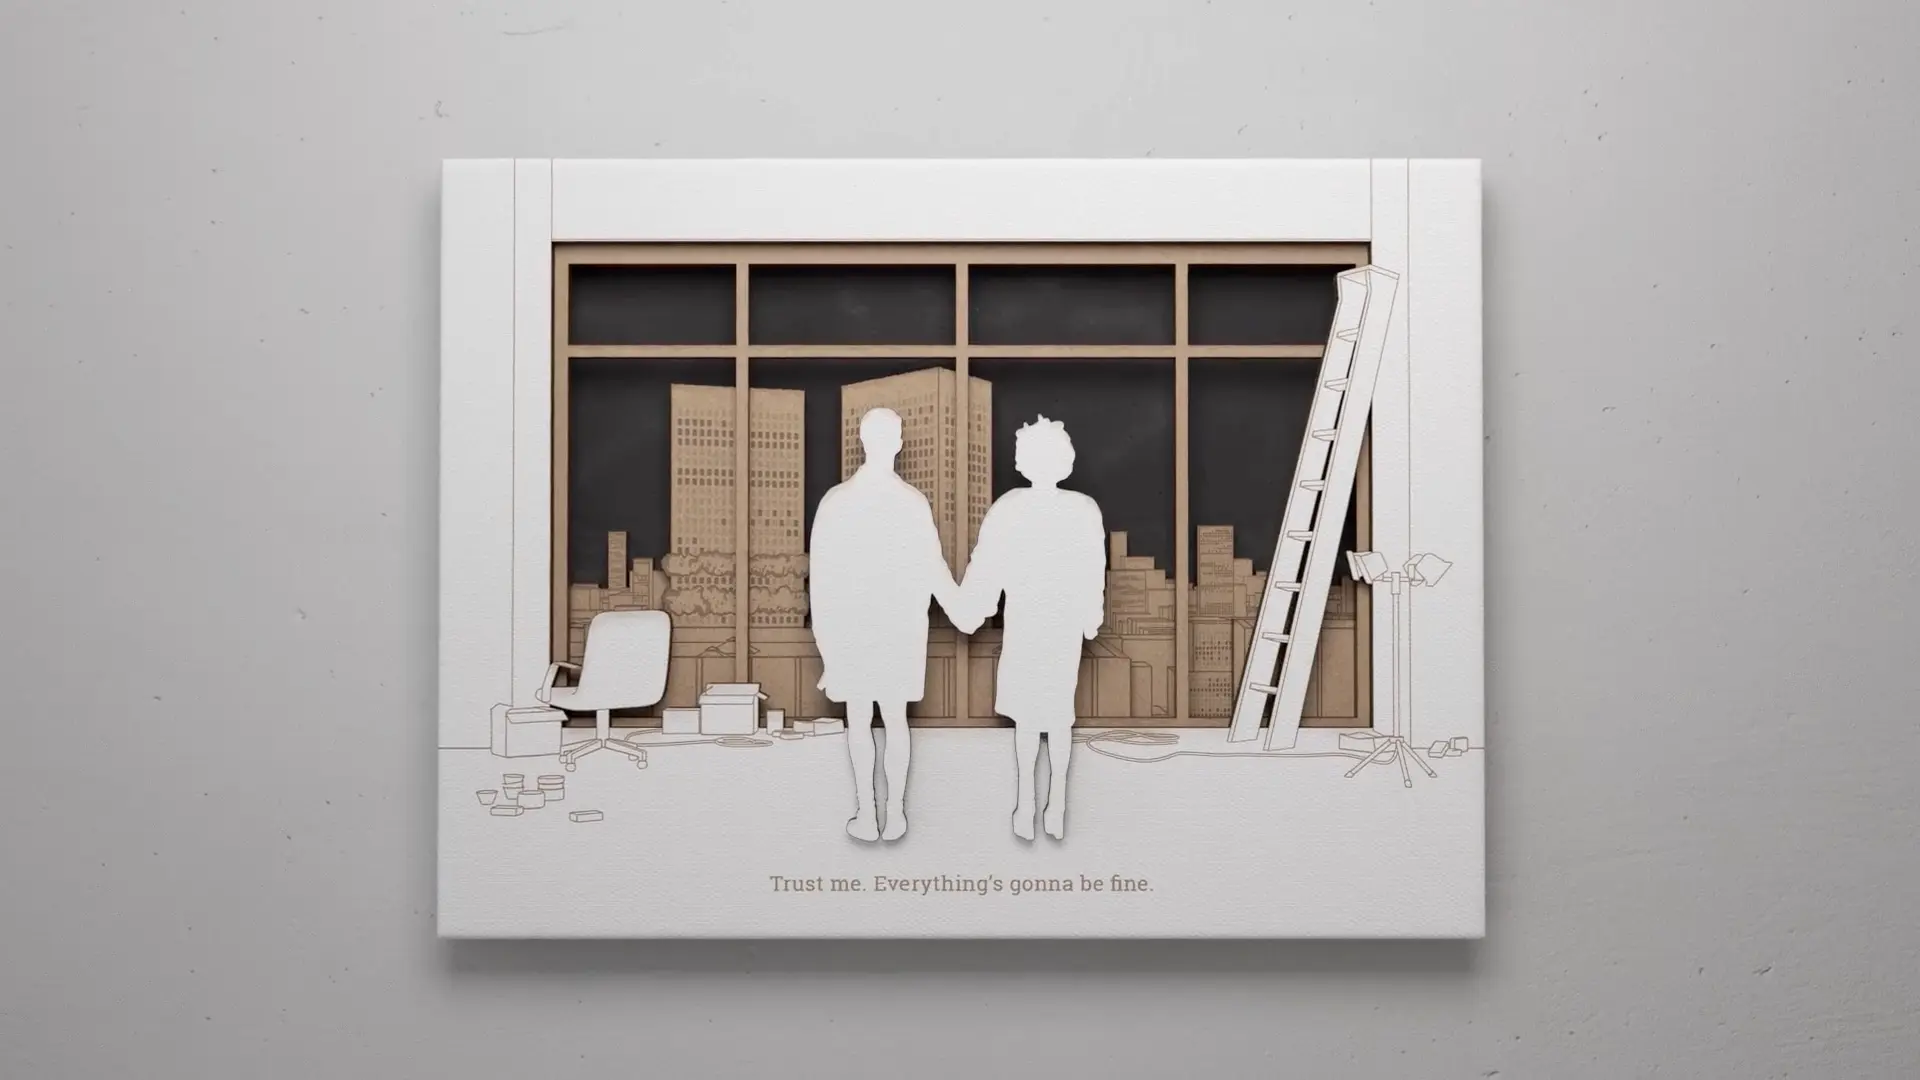 Lasercut frame of two characters holding hand from Jorge Valle's video 'Trust me. Everything's giong to be fine.'